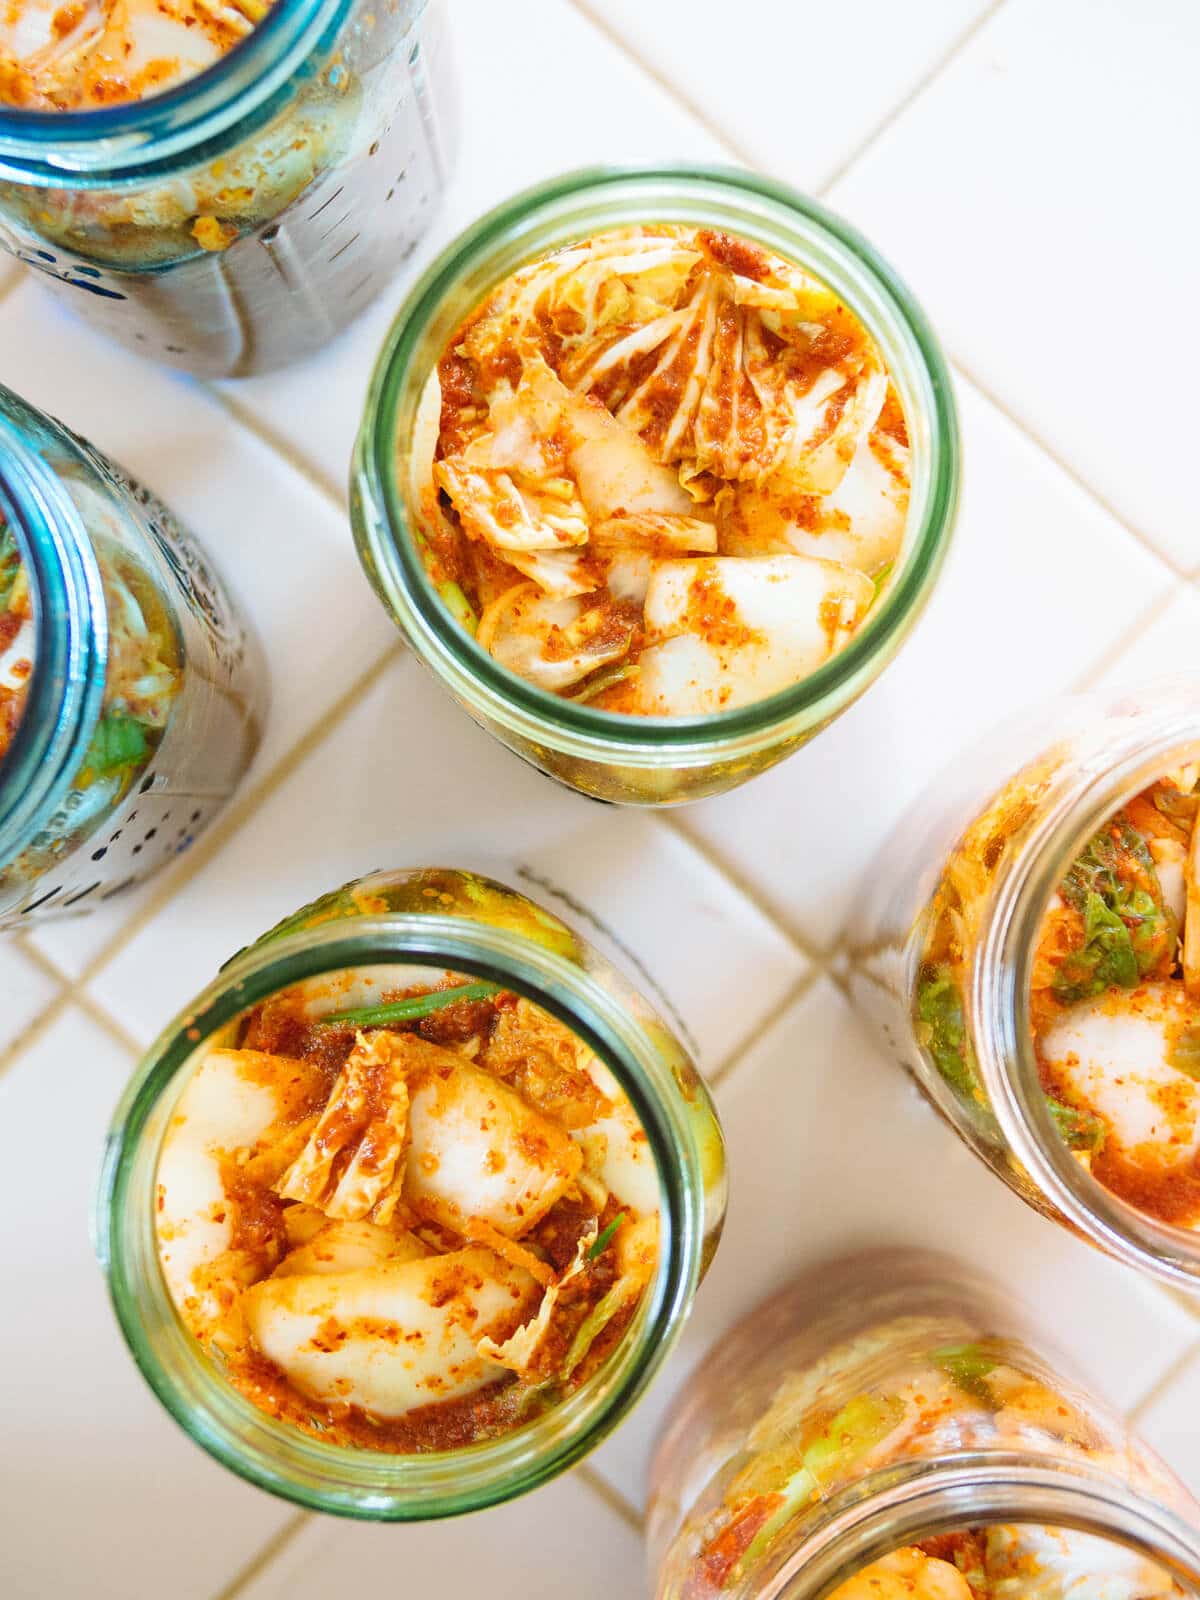 Quick and easy kimchi (even if you don't live near an Asian market)